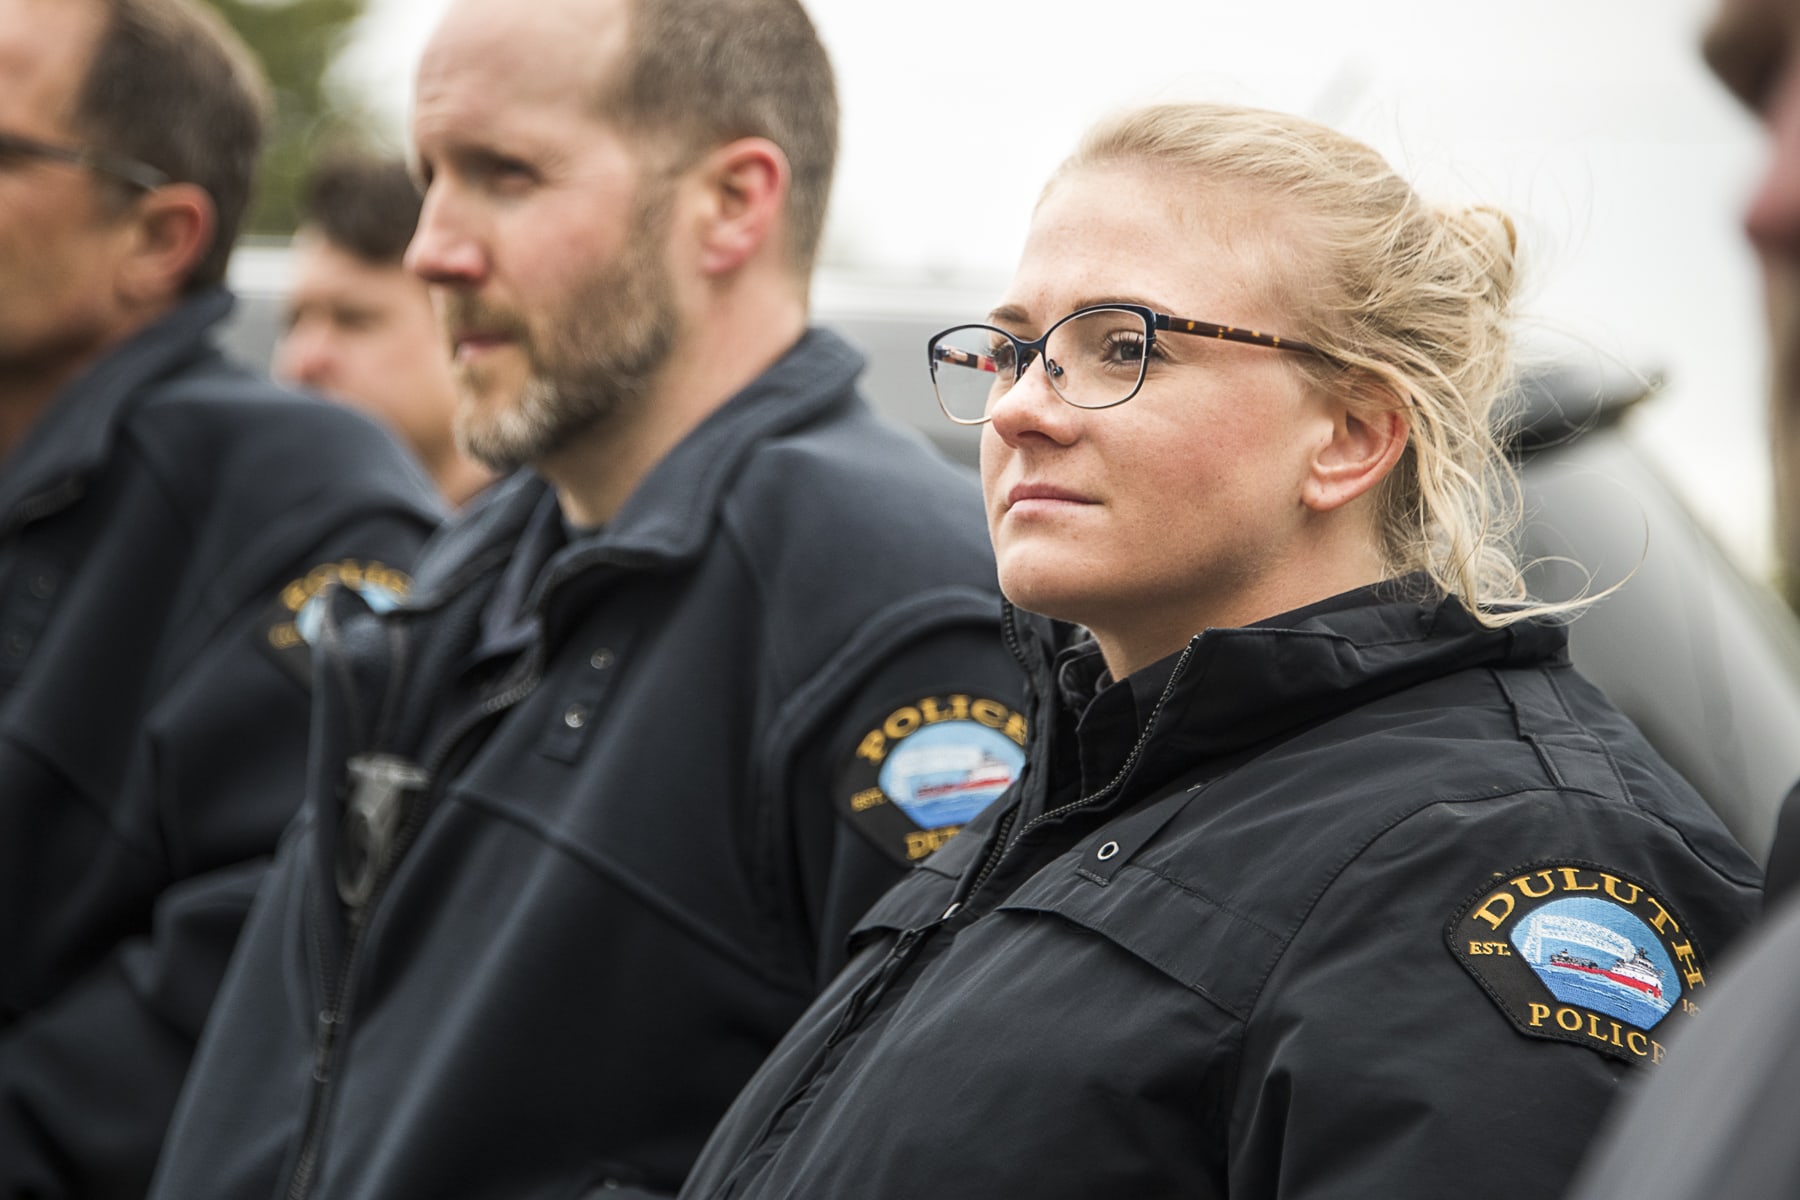 A man and a woman in police jackets look into the distance on a cloudy day